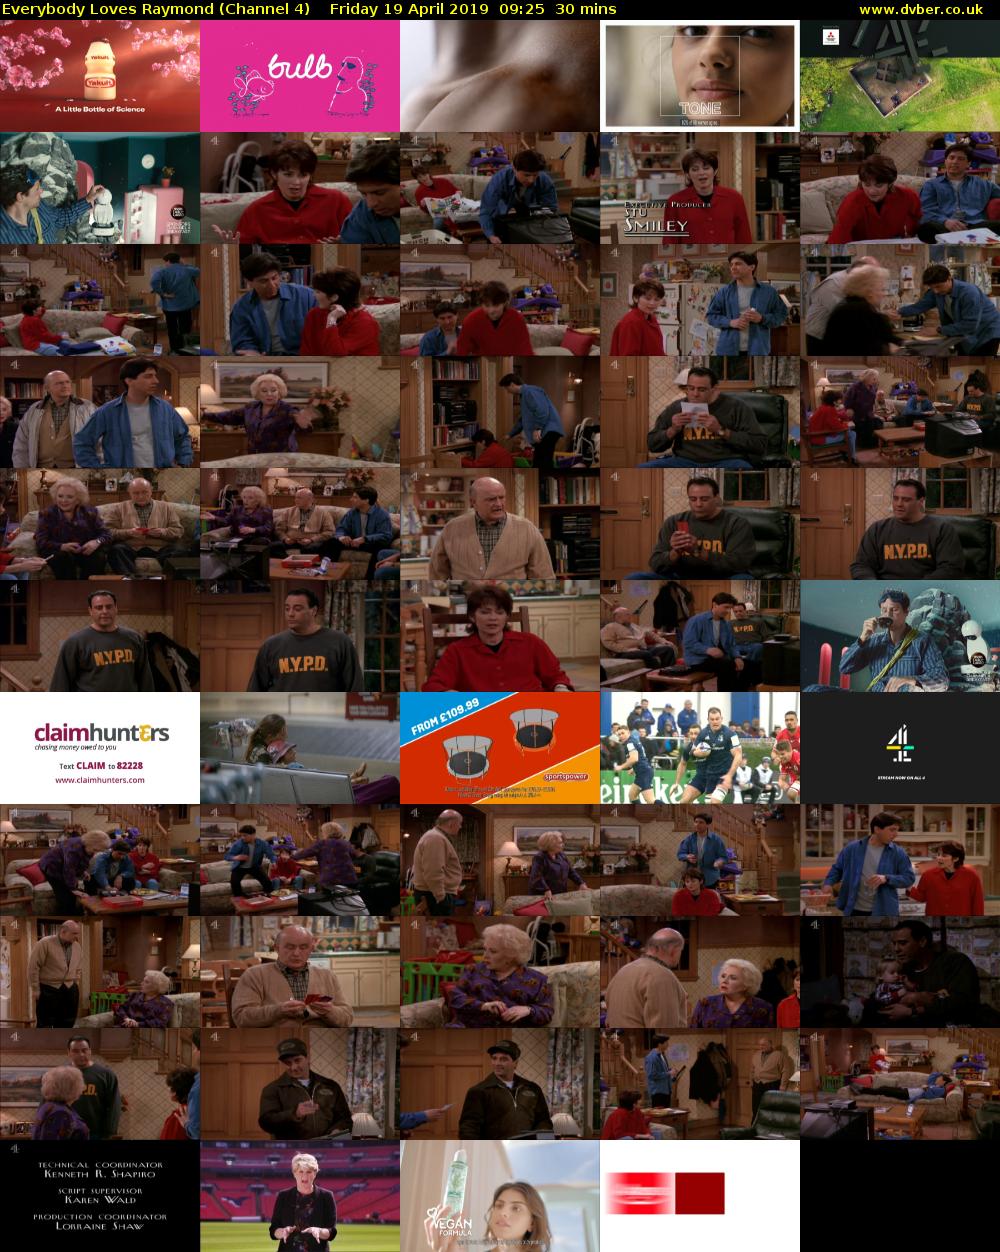 Everybody Loves Raymond (Channel 4) Friday 19 April 2019 09:25 - 09:55